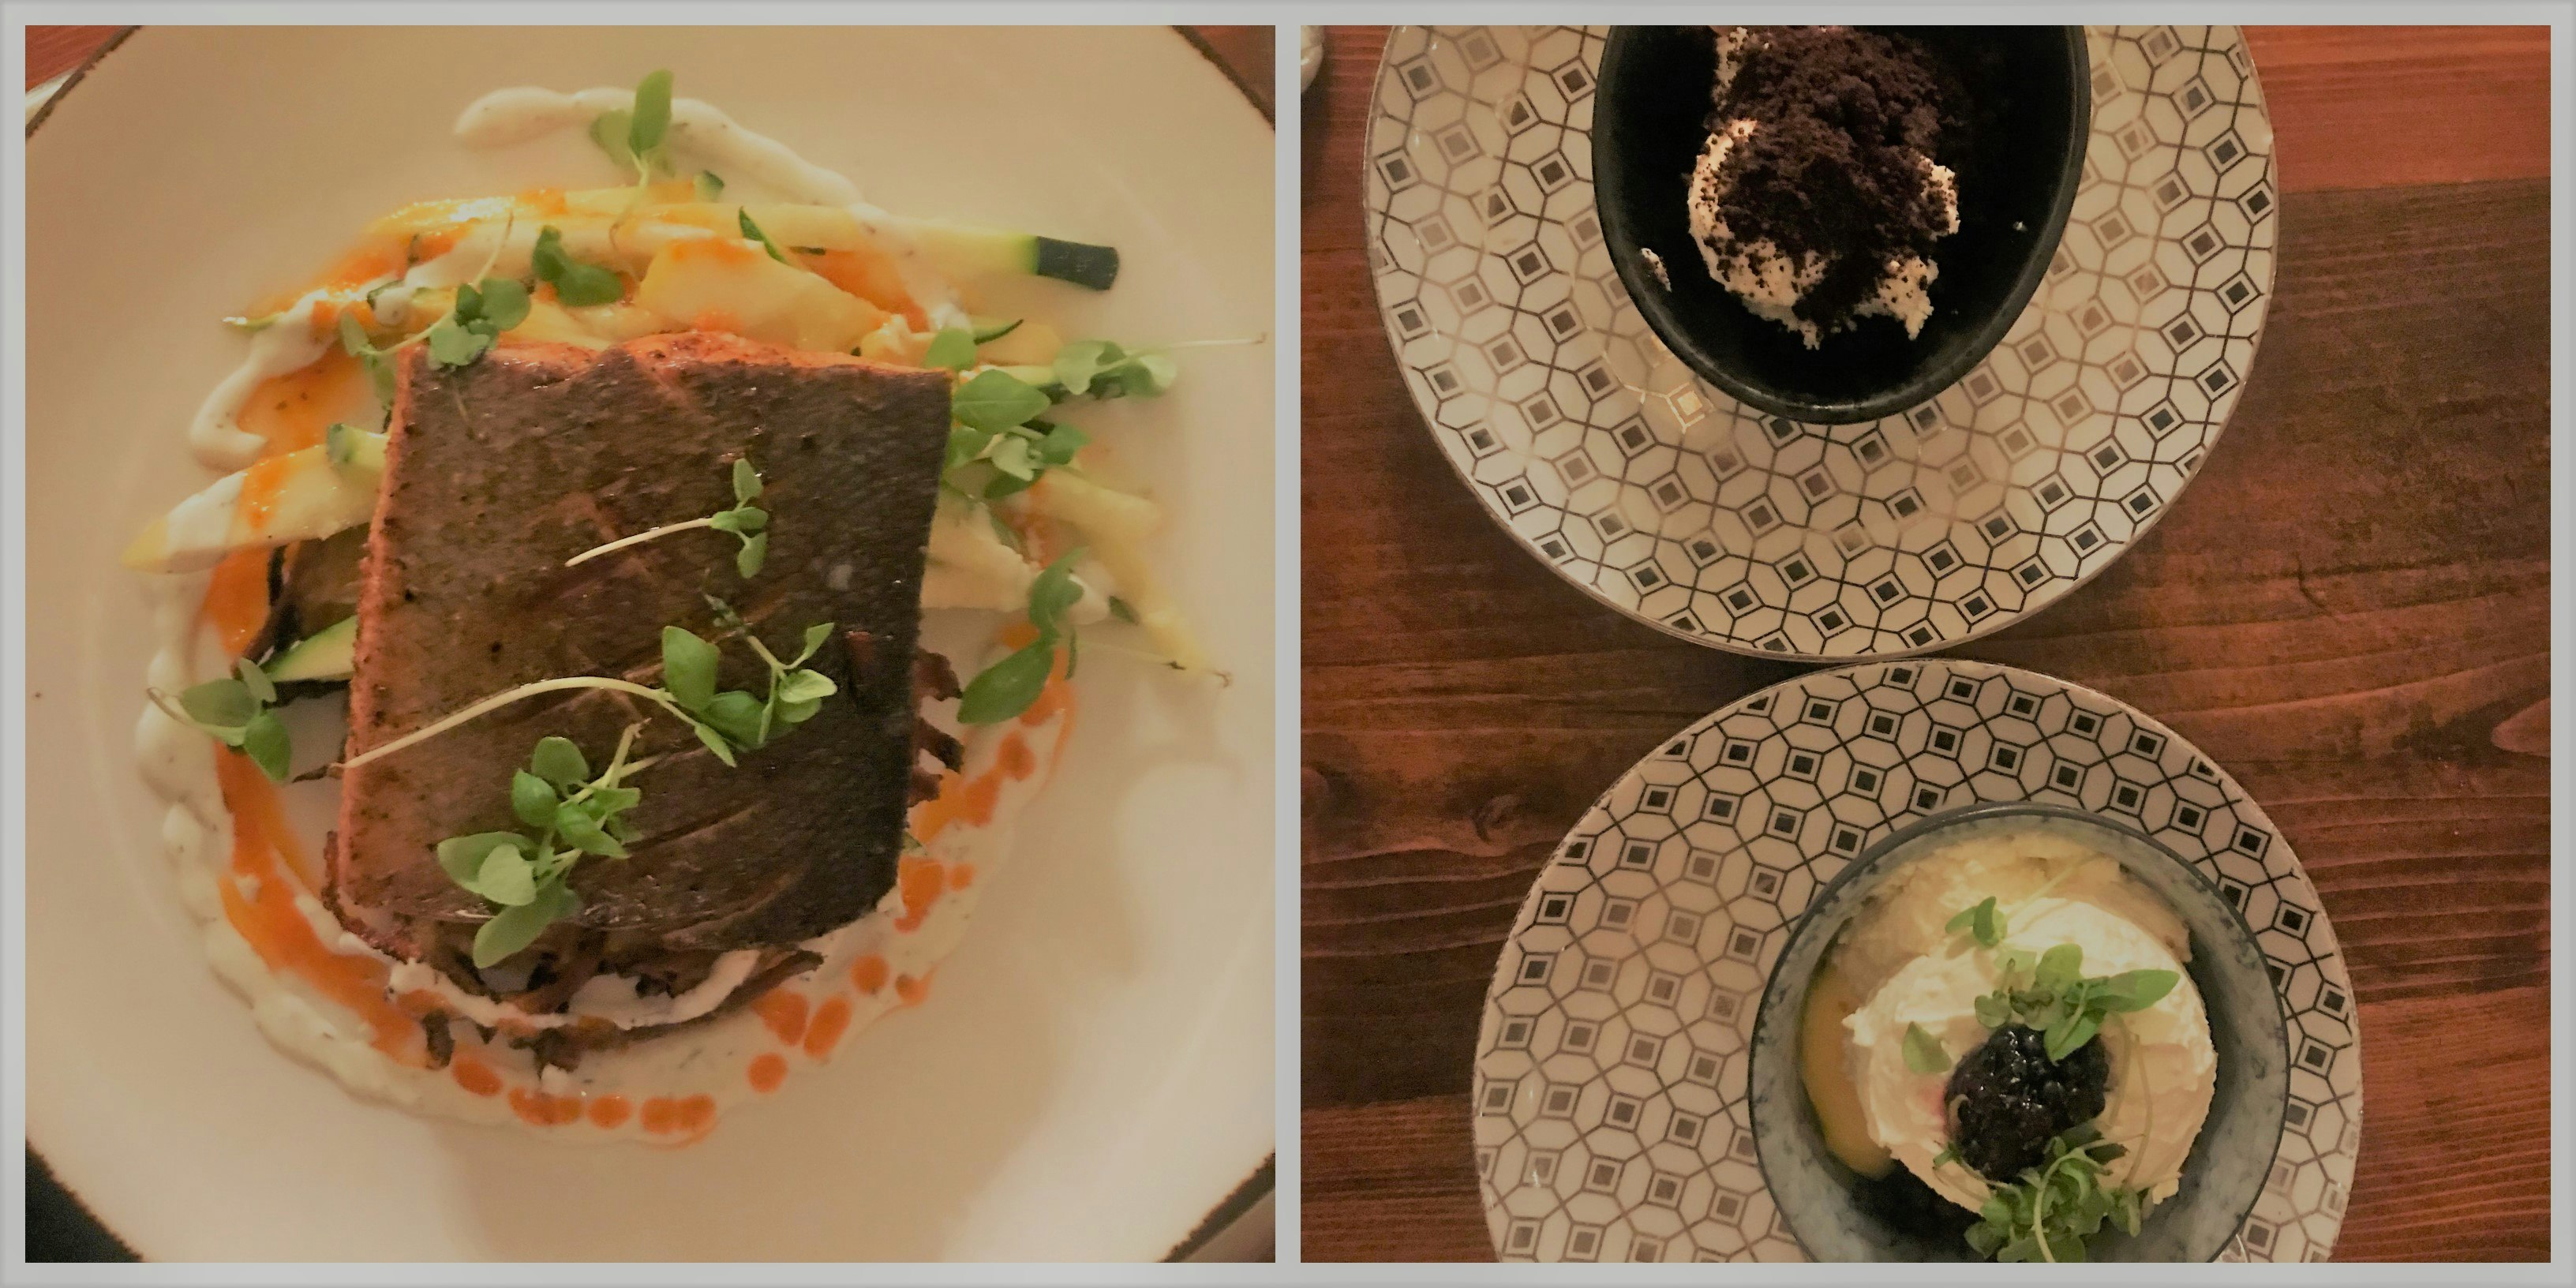 On the left, a close up of the wild salmon dinner and a dirt cup dessert